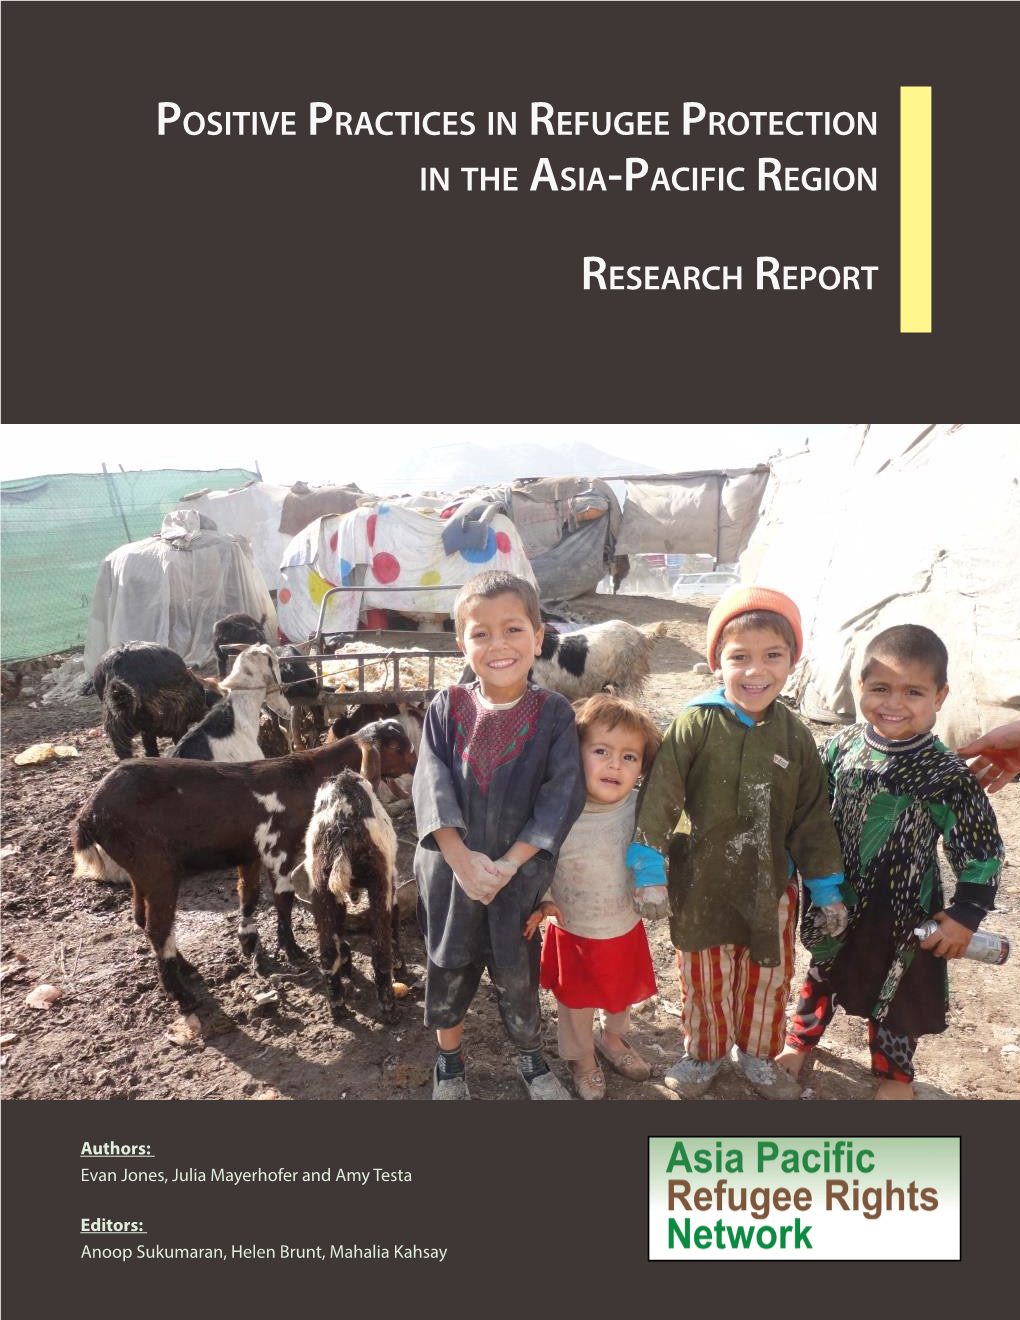 Positive Practices in Refugee Protection in the Asia-Pacific Region